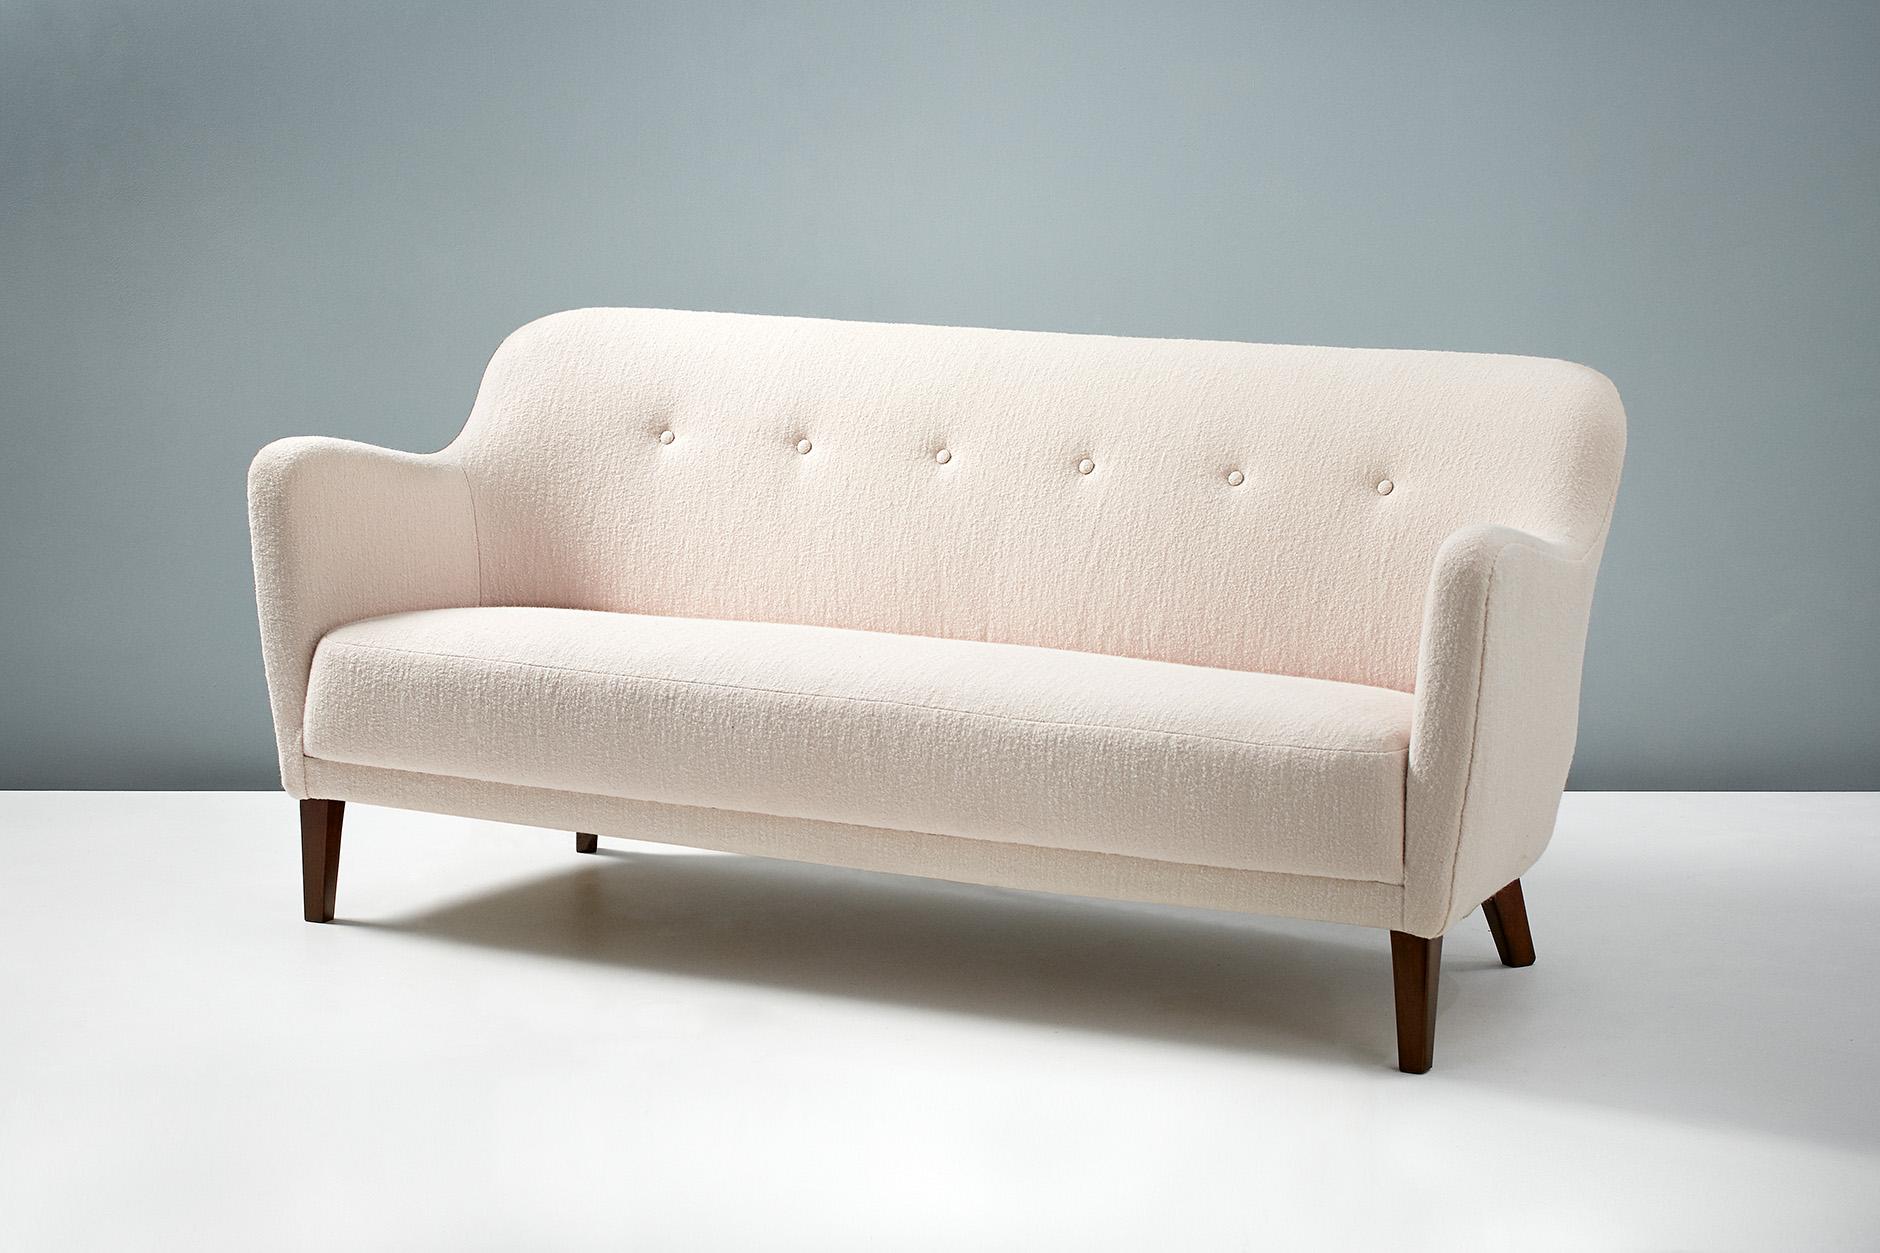 Danish cabinetmaker made sofa in the manner of Finn Juhl, produced in Denmark, circa 1940s.

The sofa has been completely reconditioned by our in-house team of upholsterers at our workshops in London. We have recovered the sofa in luxurious,